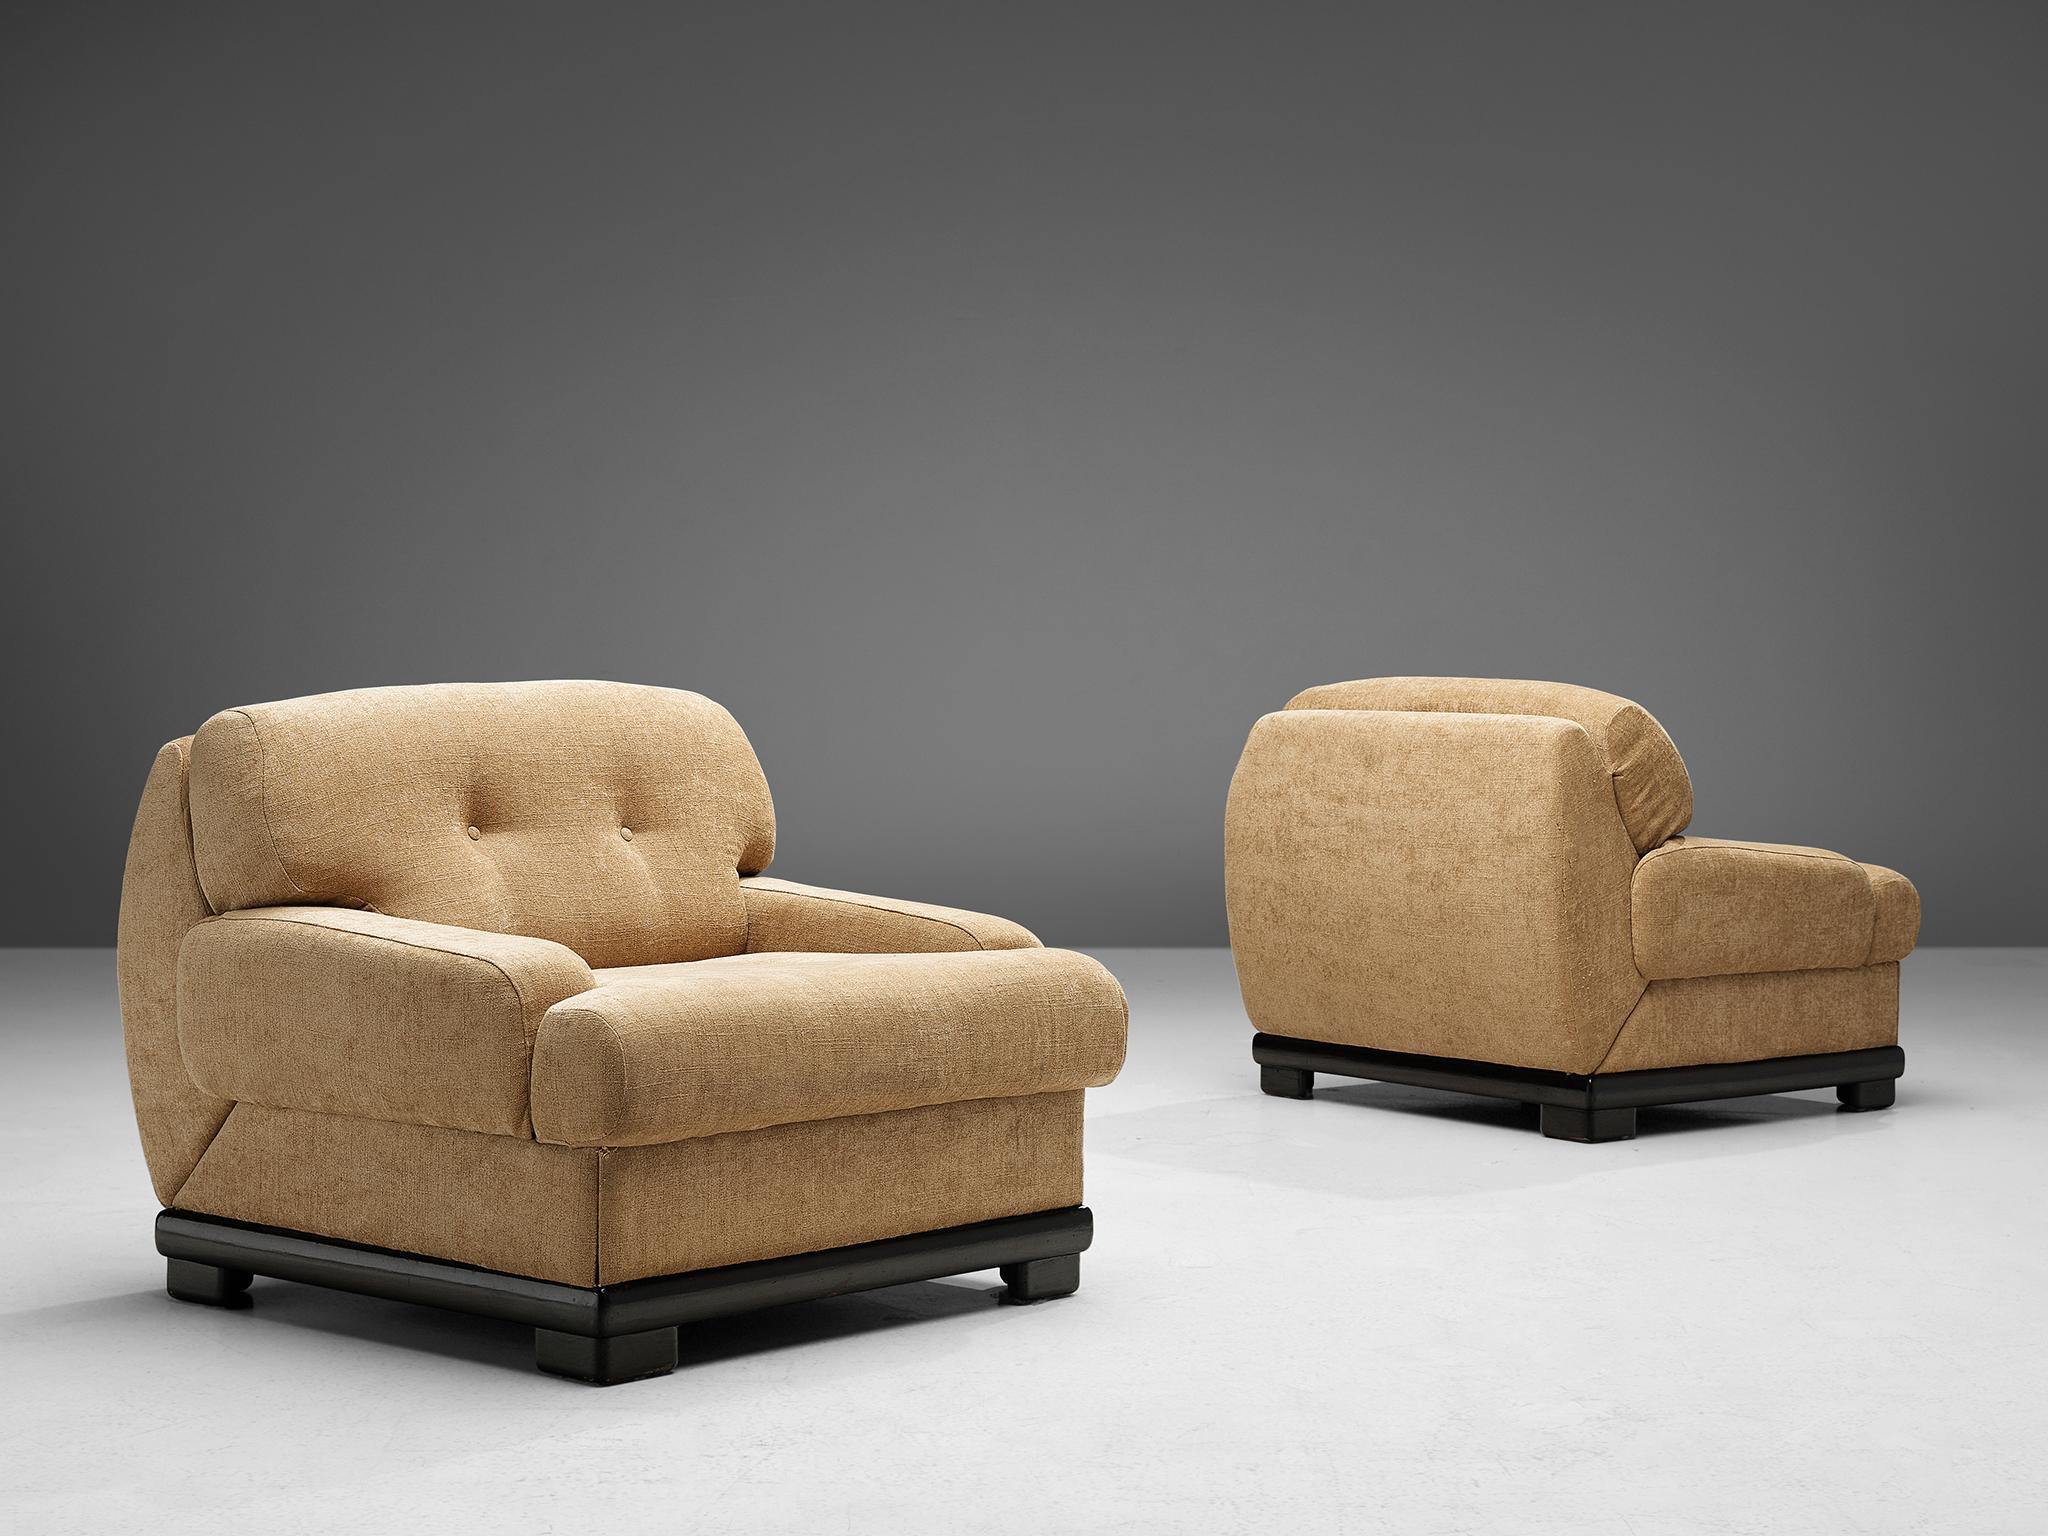 Set of two lounge chairs, fabric and lacquered wood, Italy, 1950s. 

Italian set of opulent armchairs with tufted backrests. These chairs are the pinnacle of lush and comfort thanks to the chunky shaped backrests and low armrests. The chairs feature